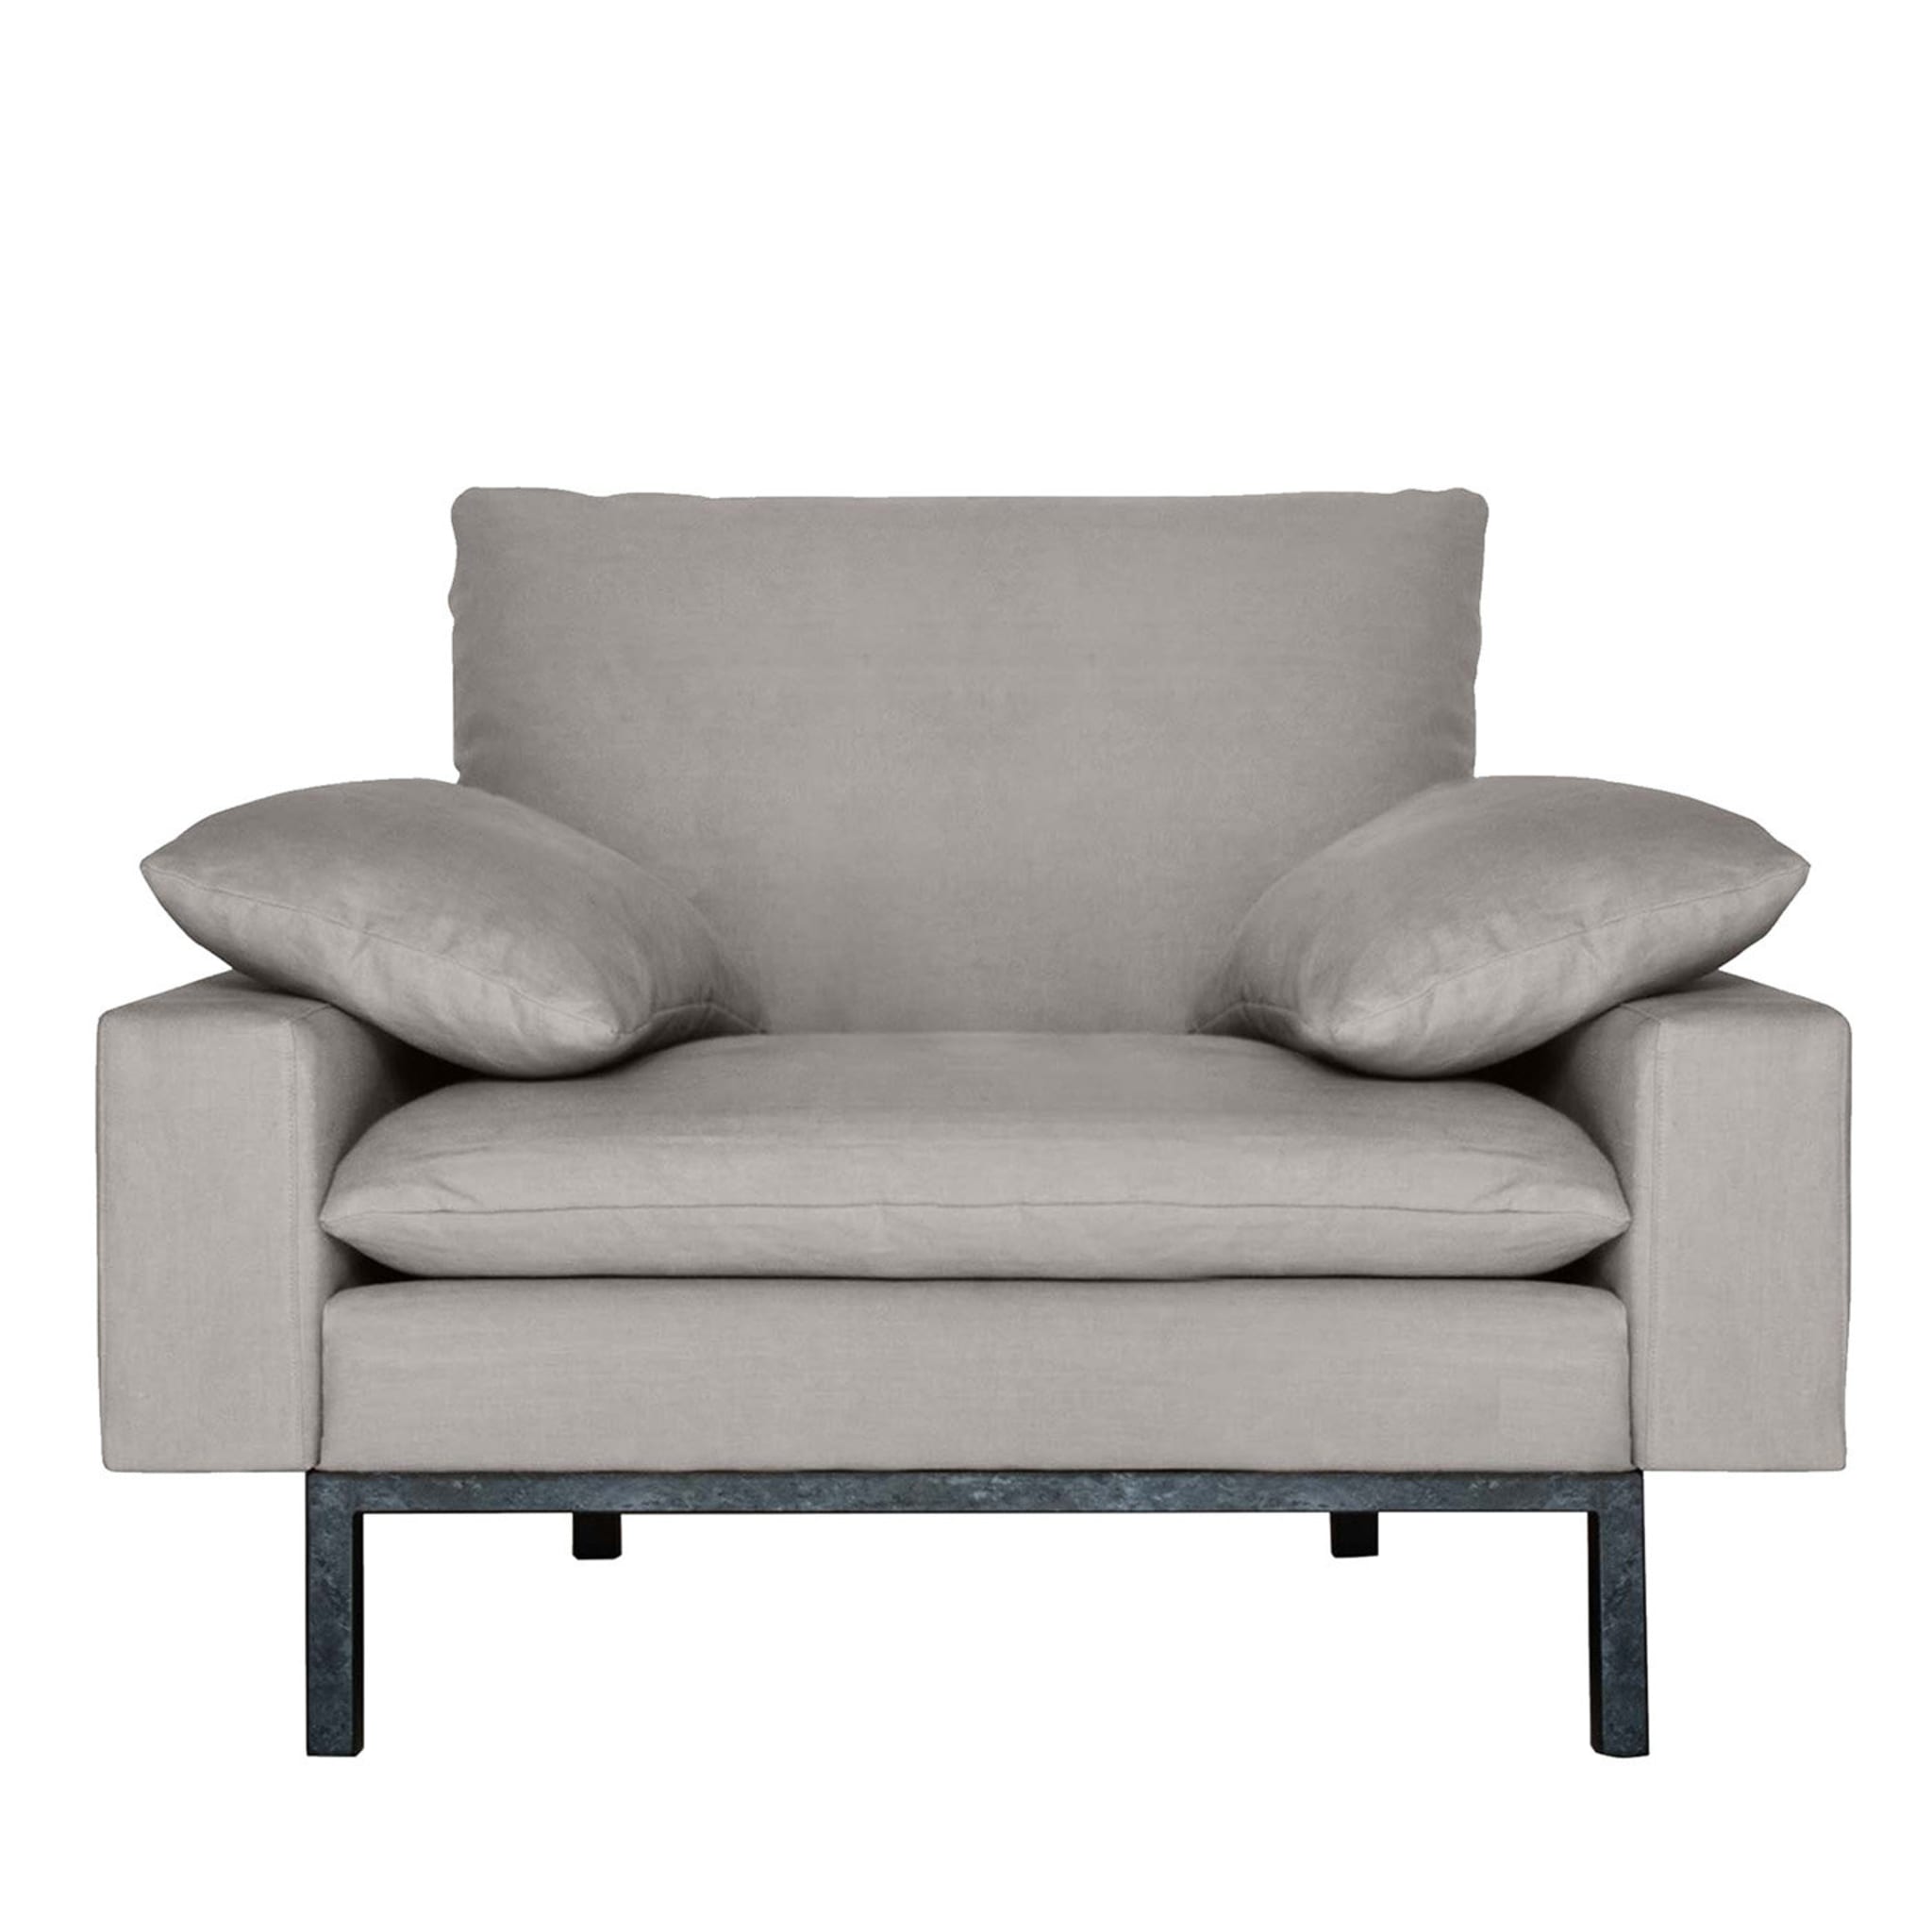 Bad Ecological Gray Armchair by Vanessa Tambelli - Main view